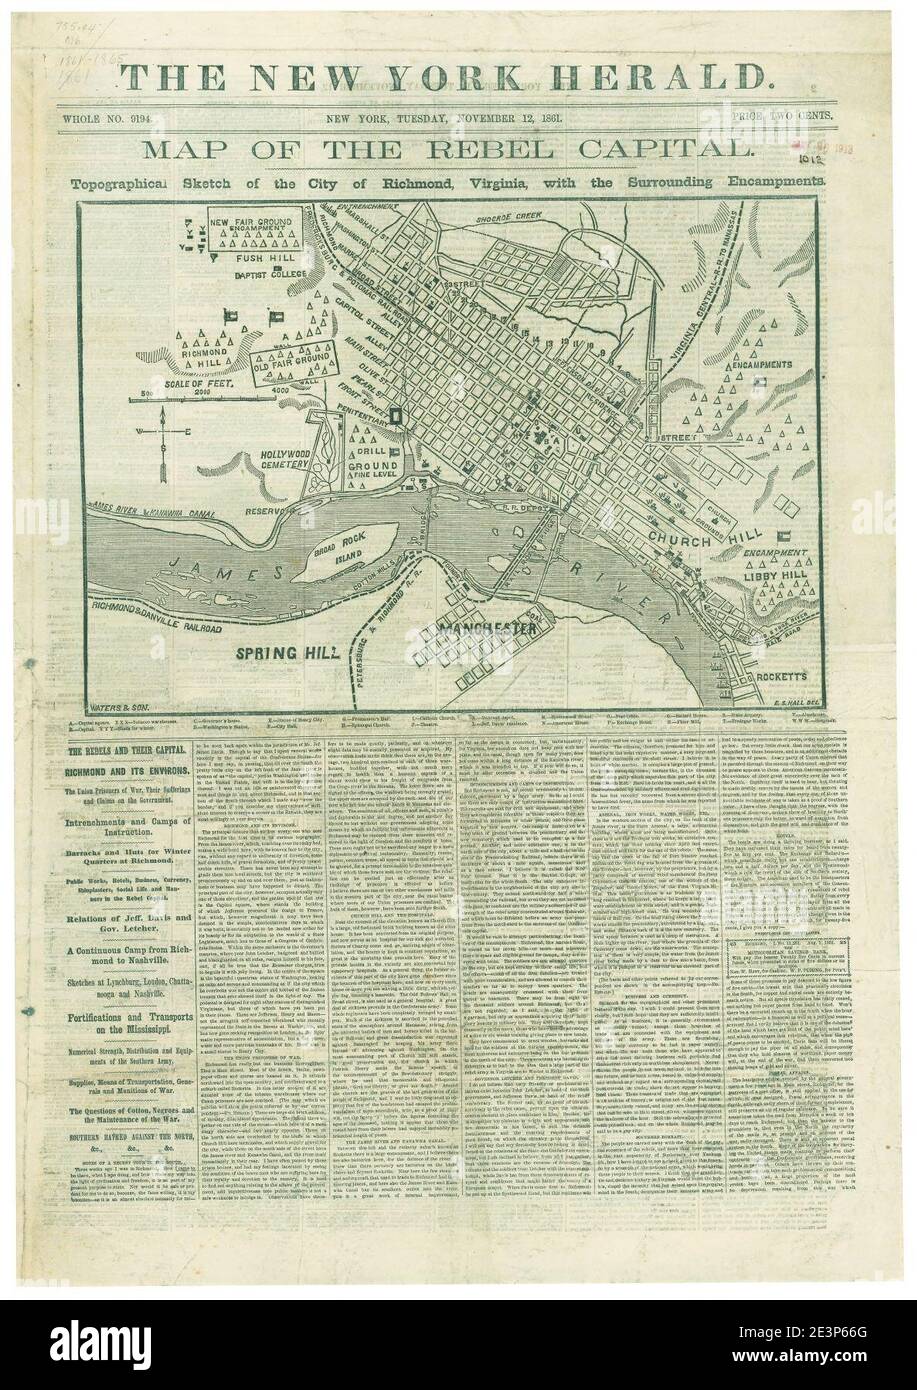 Map of the rebel capital - topographical sketch of the city of Richmond, Virginia with the surrounding encampments Stock Photo